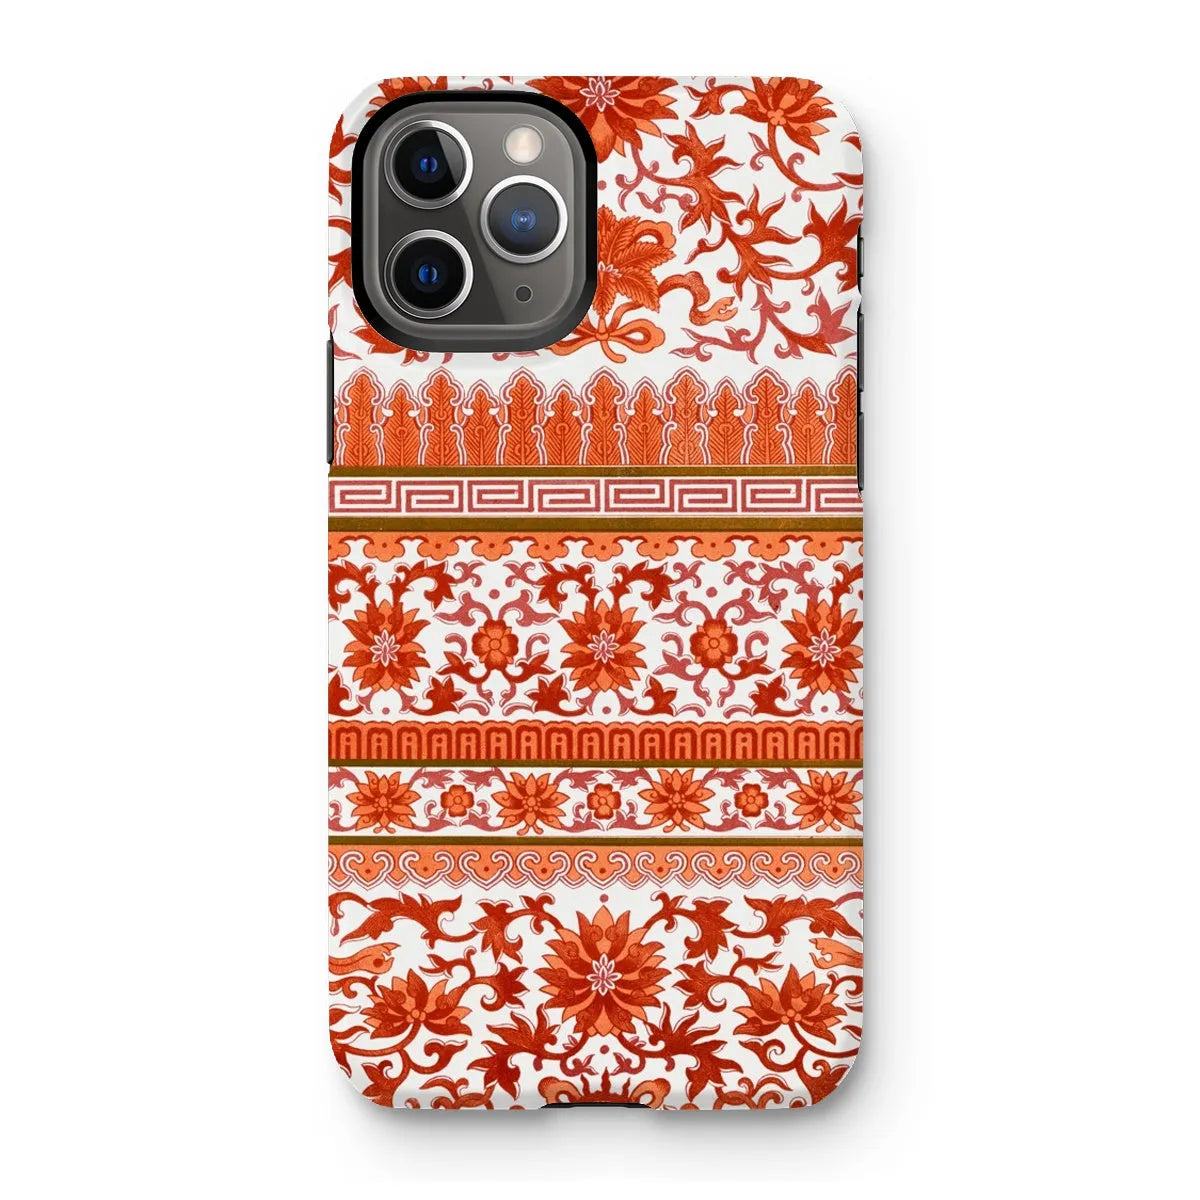 Fiery Chinese Floral Aesthetic Art Phone Case - Owen Jones - Iphone 11 Pro / Matte - Mobile Phone Cases - Aesthetic Art